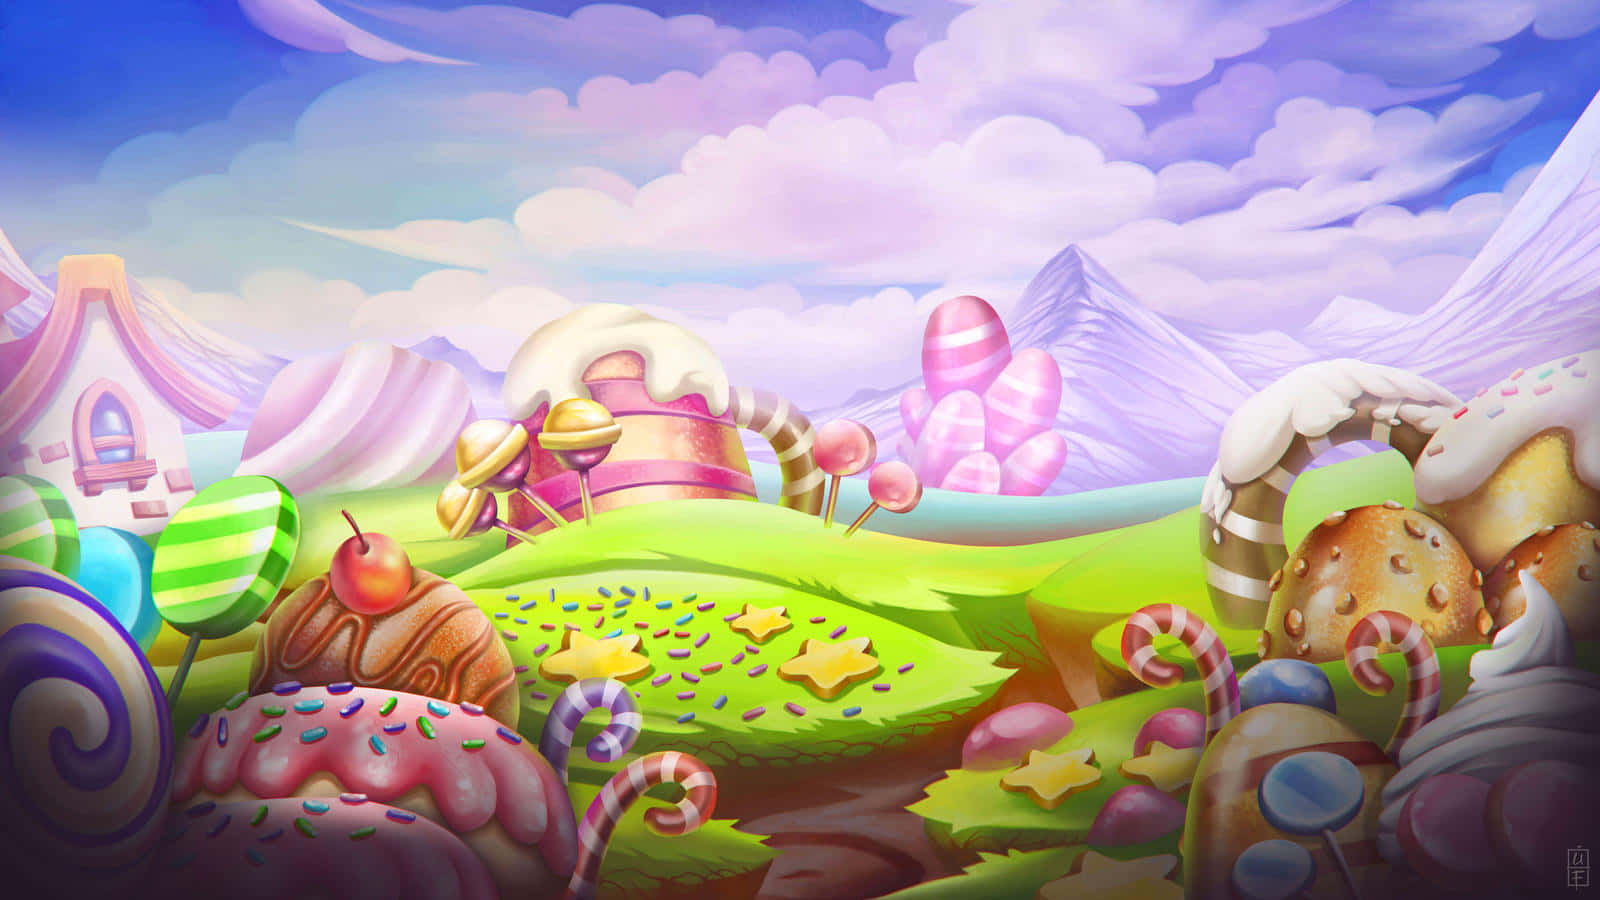 Be Transported to a Land of Pure Imagination - Candy Land